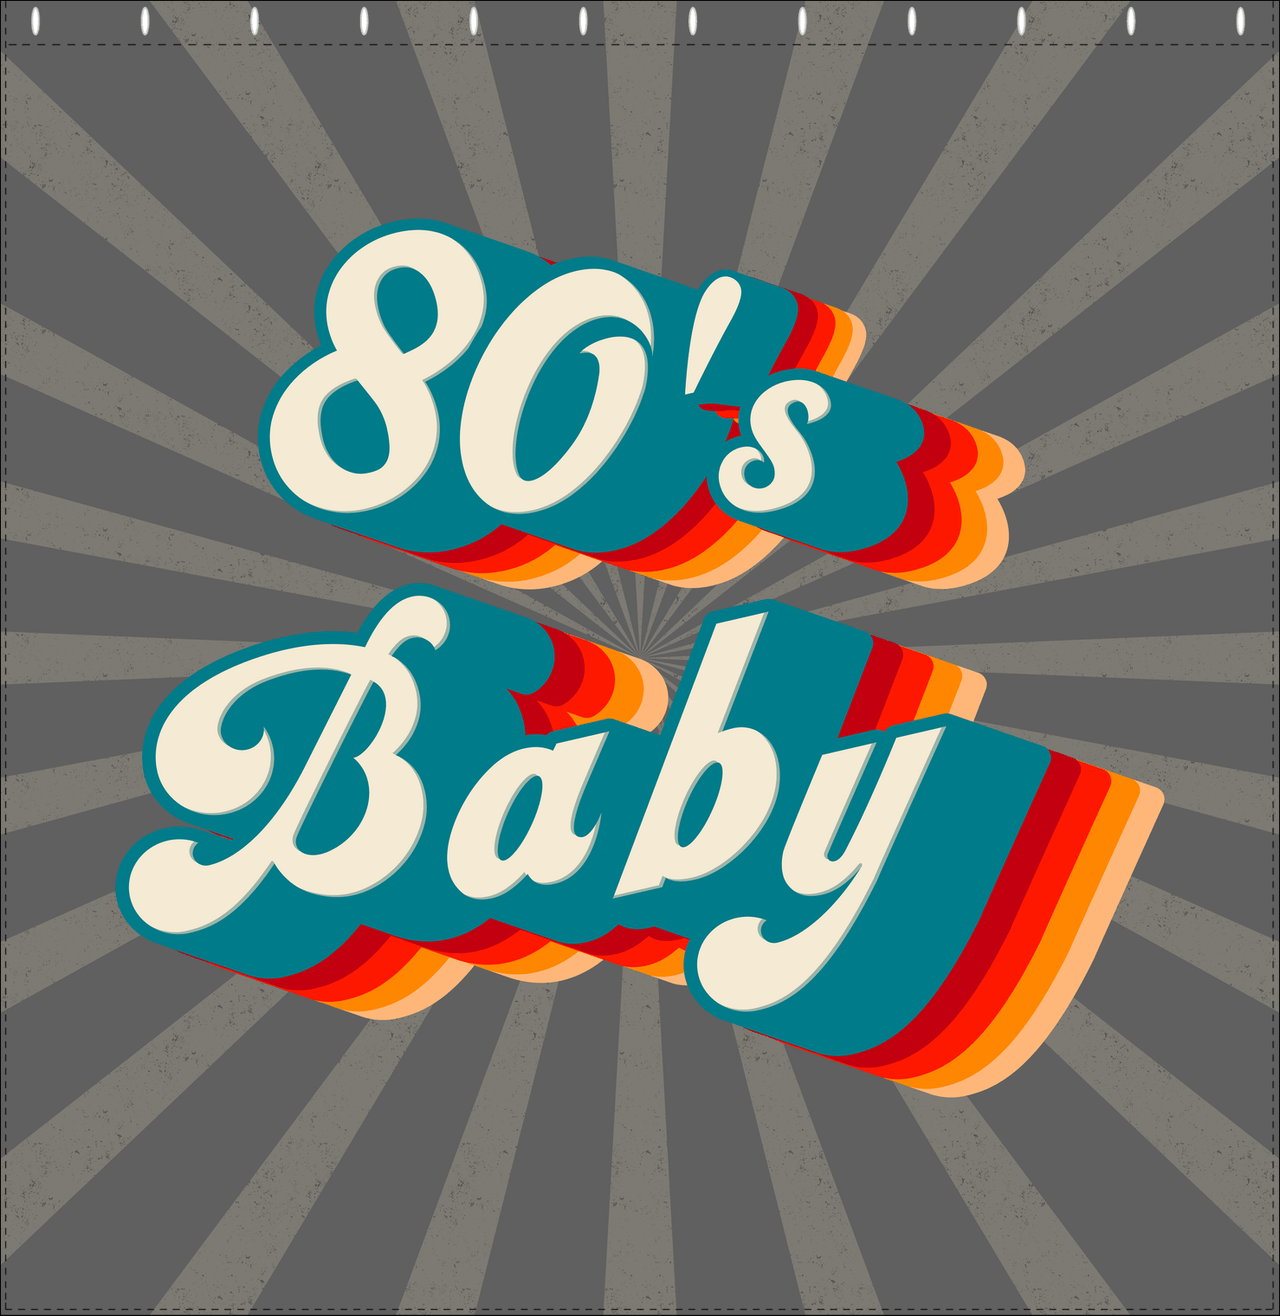 Retro Shower Curtain - 80s Baby - Decorate View